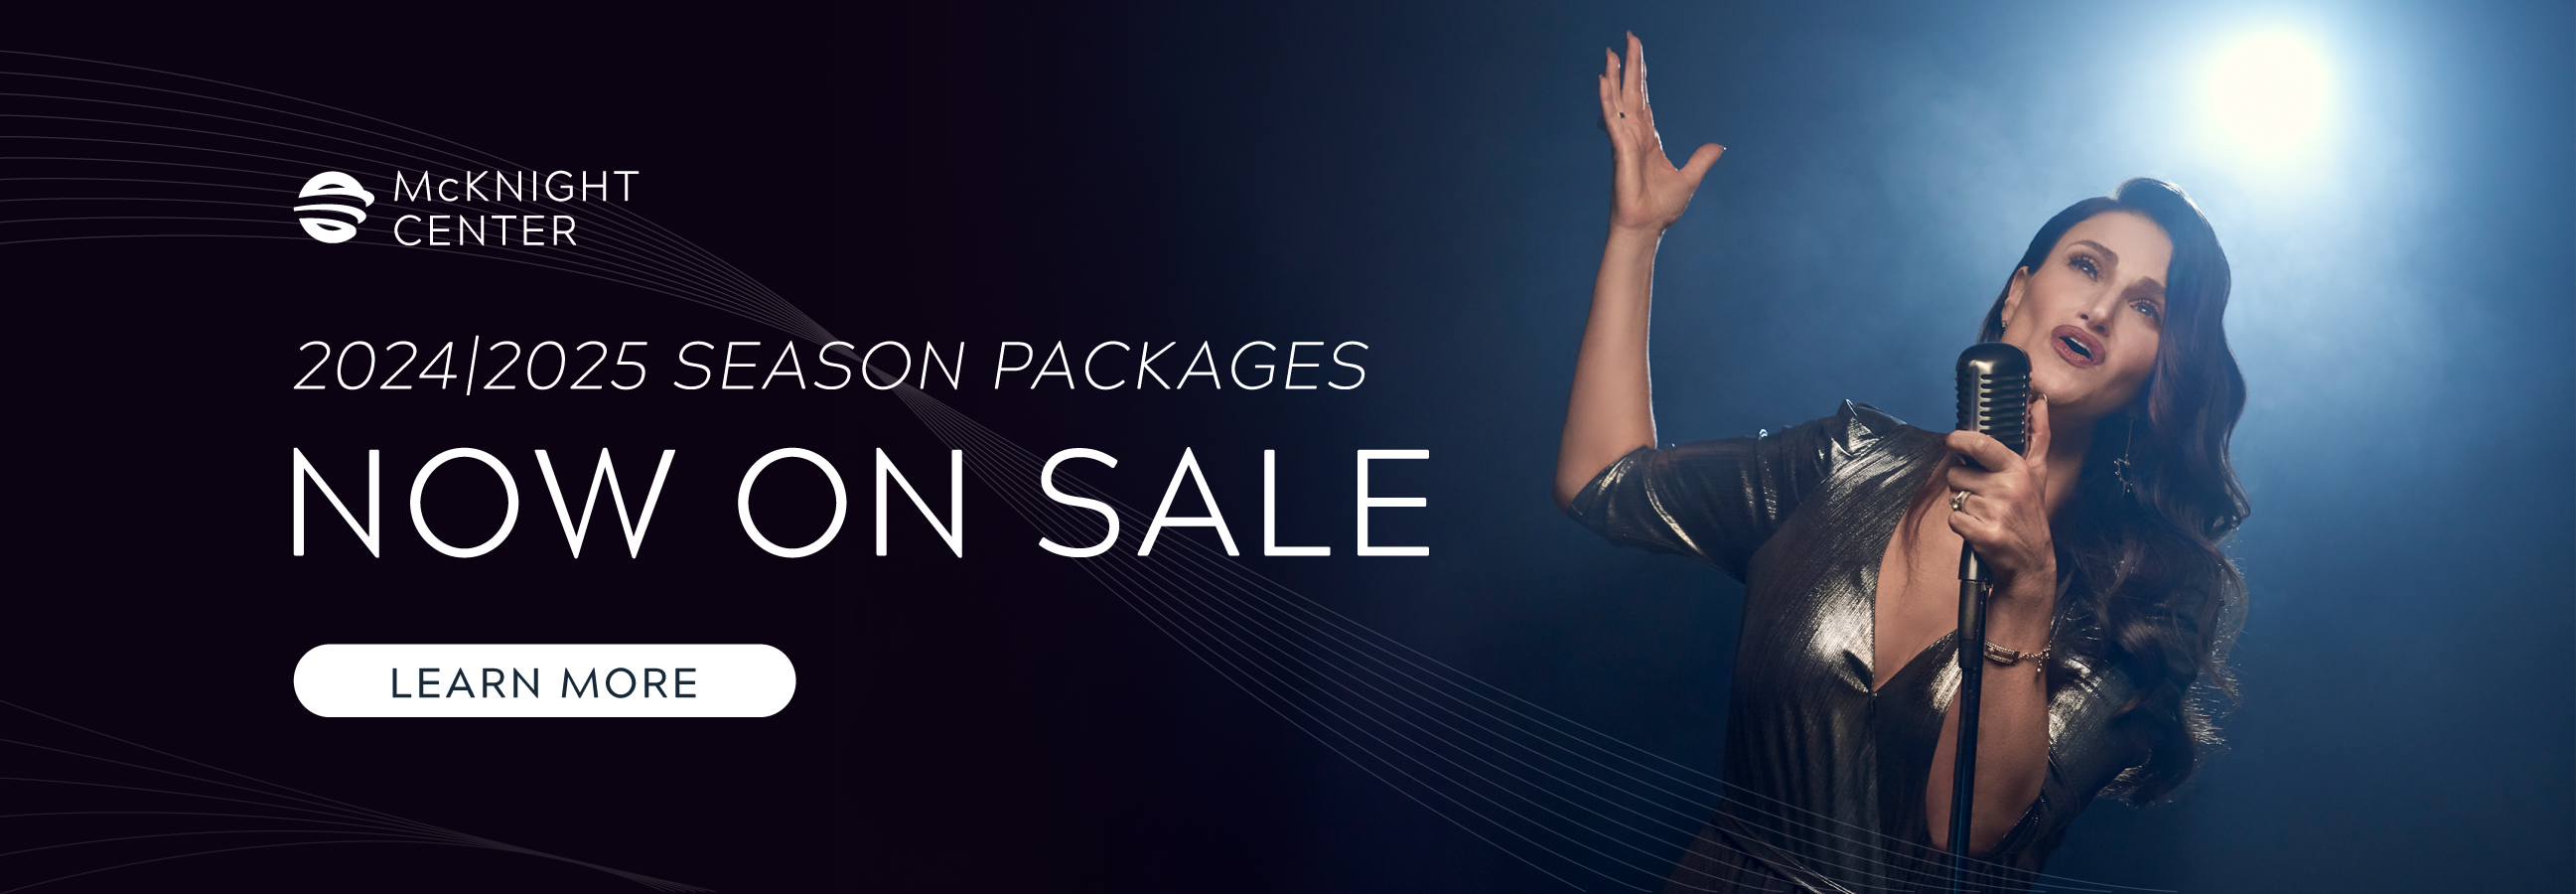 Curated Season Packages for the 2024-2025 Season On Sale Now